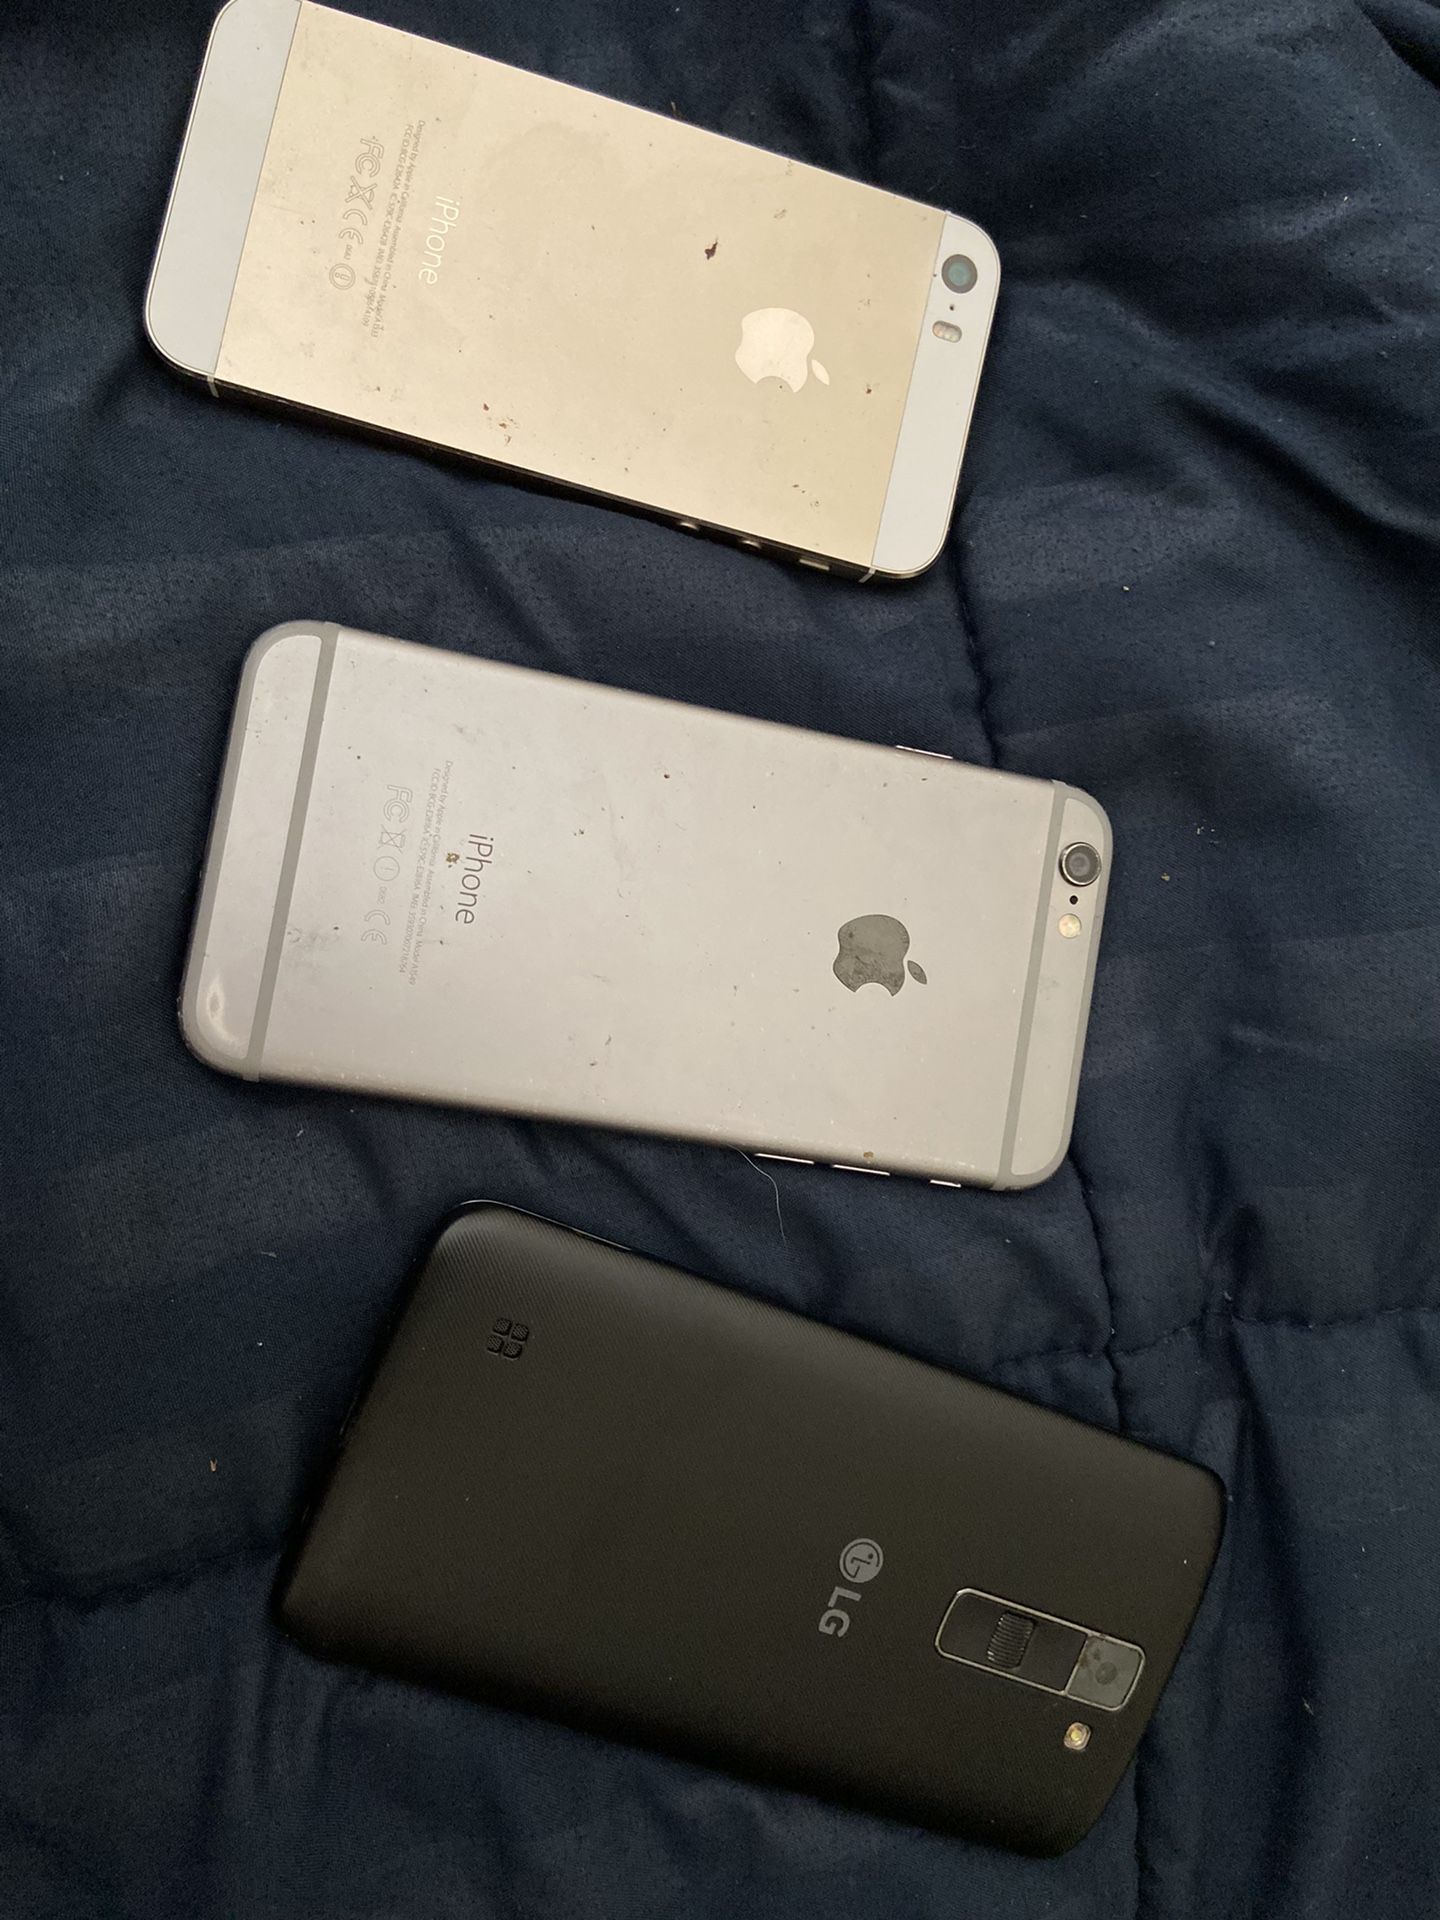 iPhones (5s,6) and android